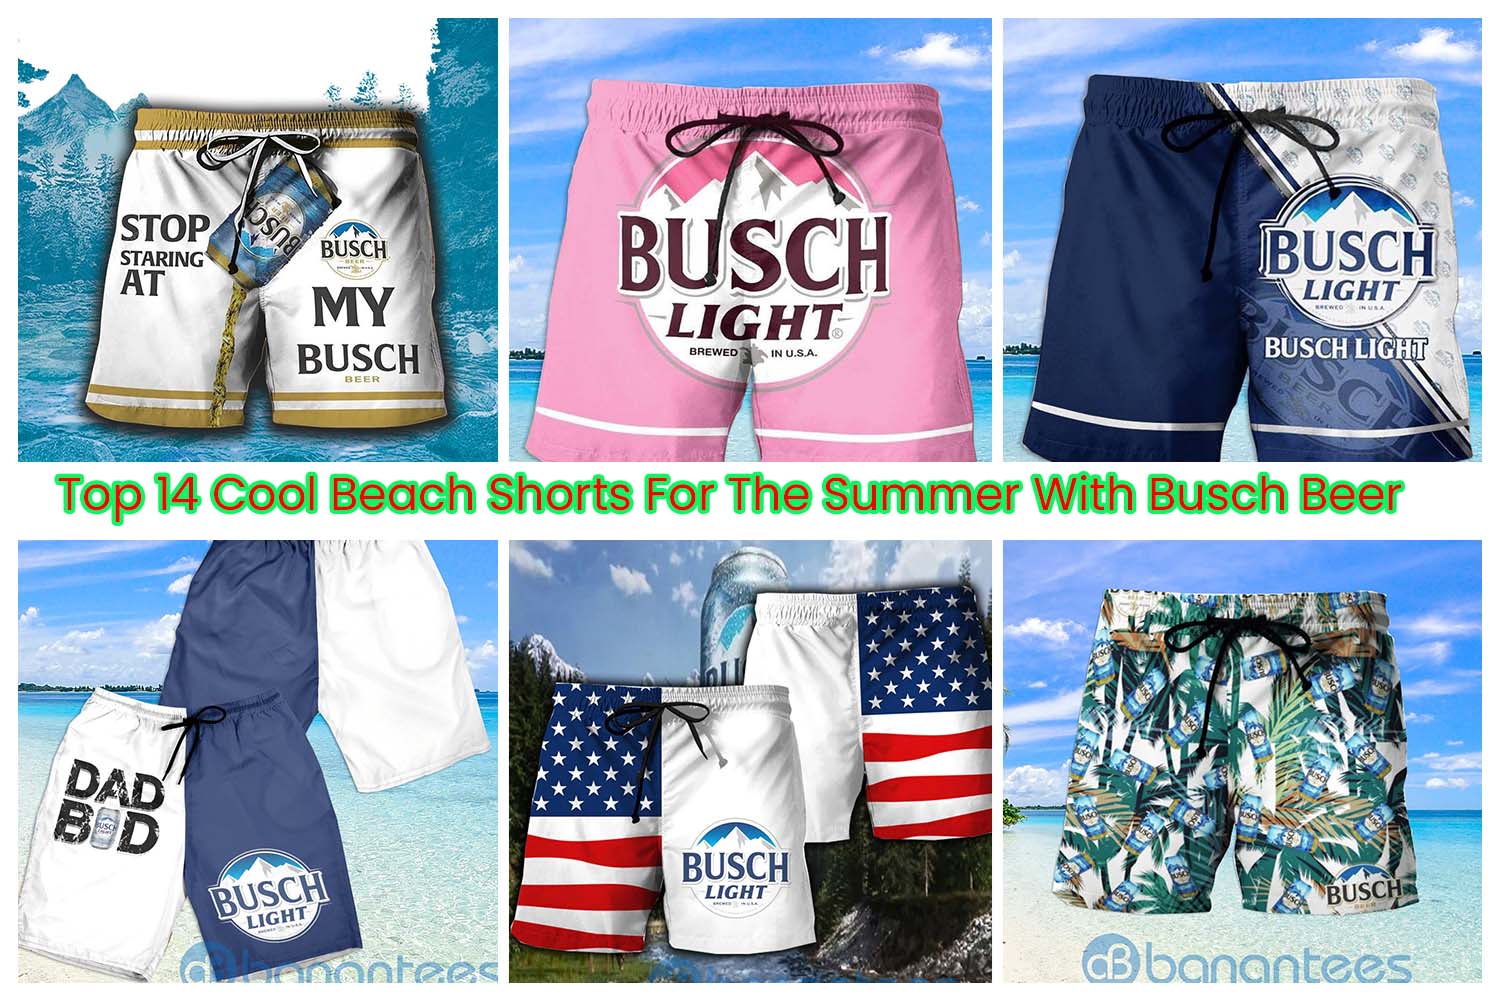 Top 14 Cool Beach Shorts For The Summer With Busch Beer